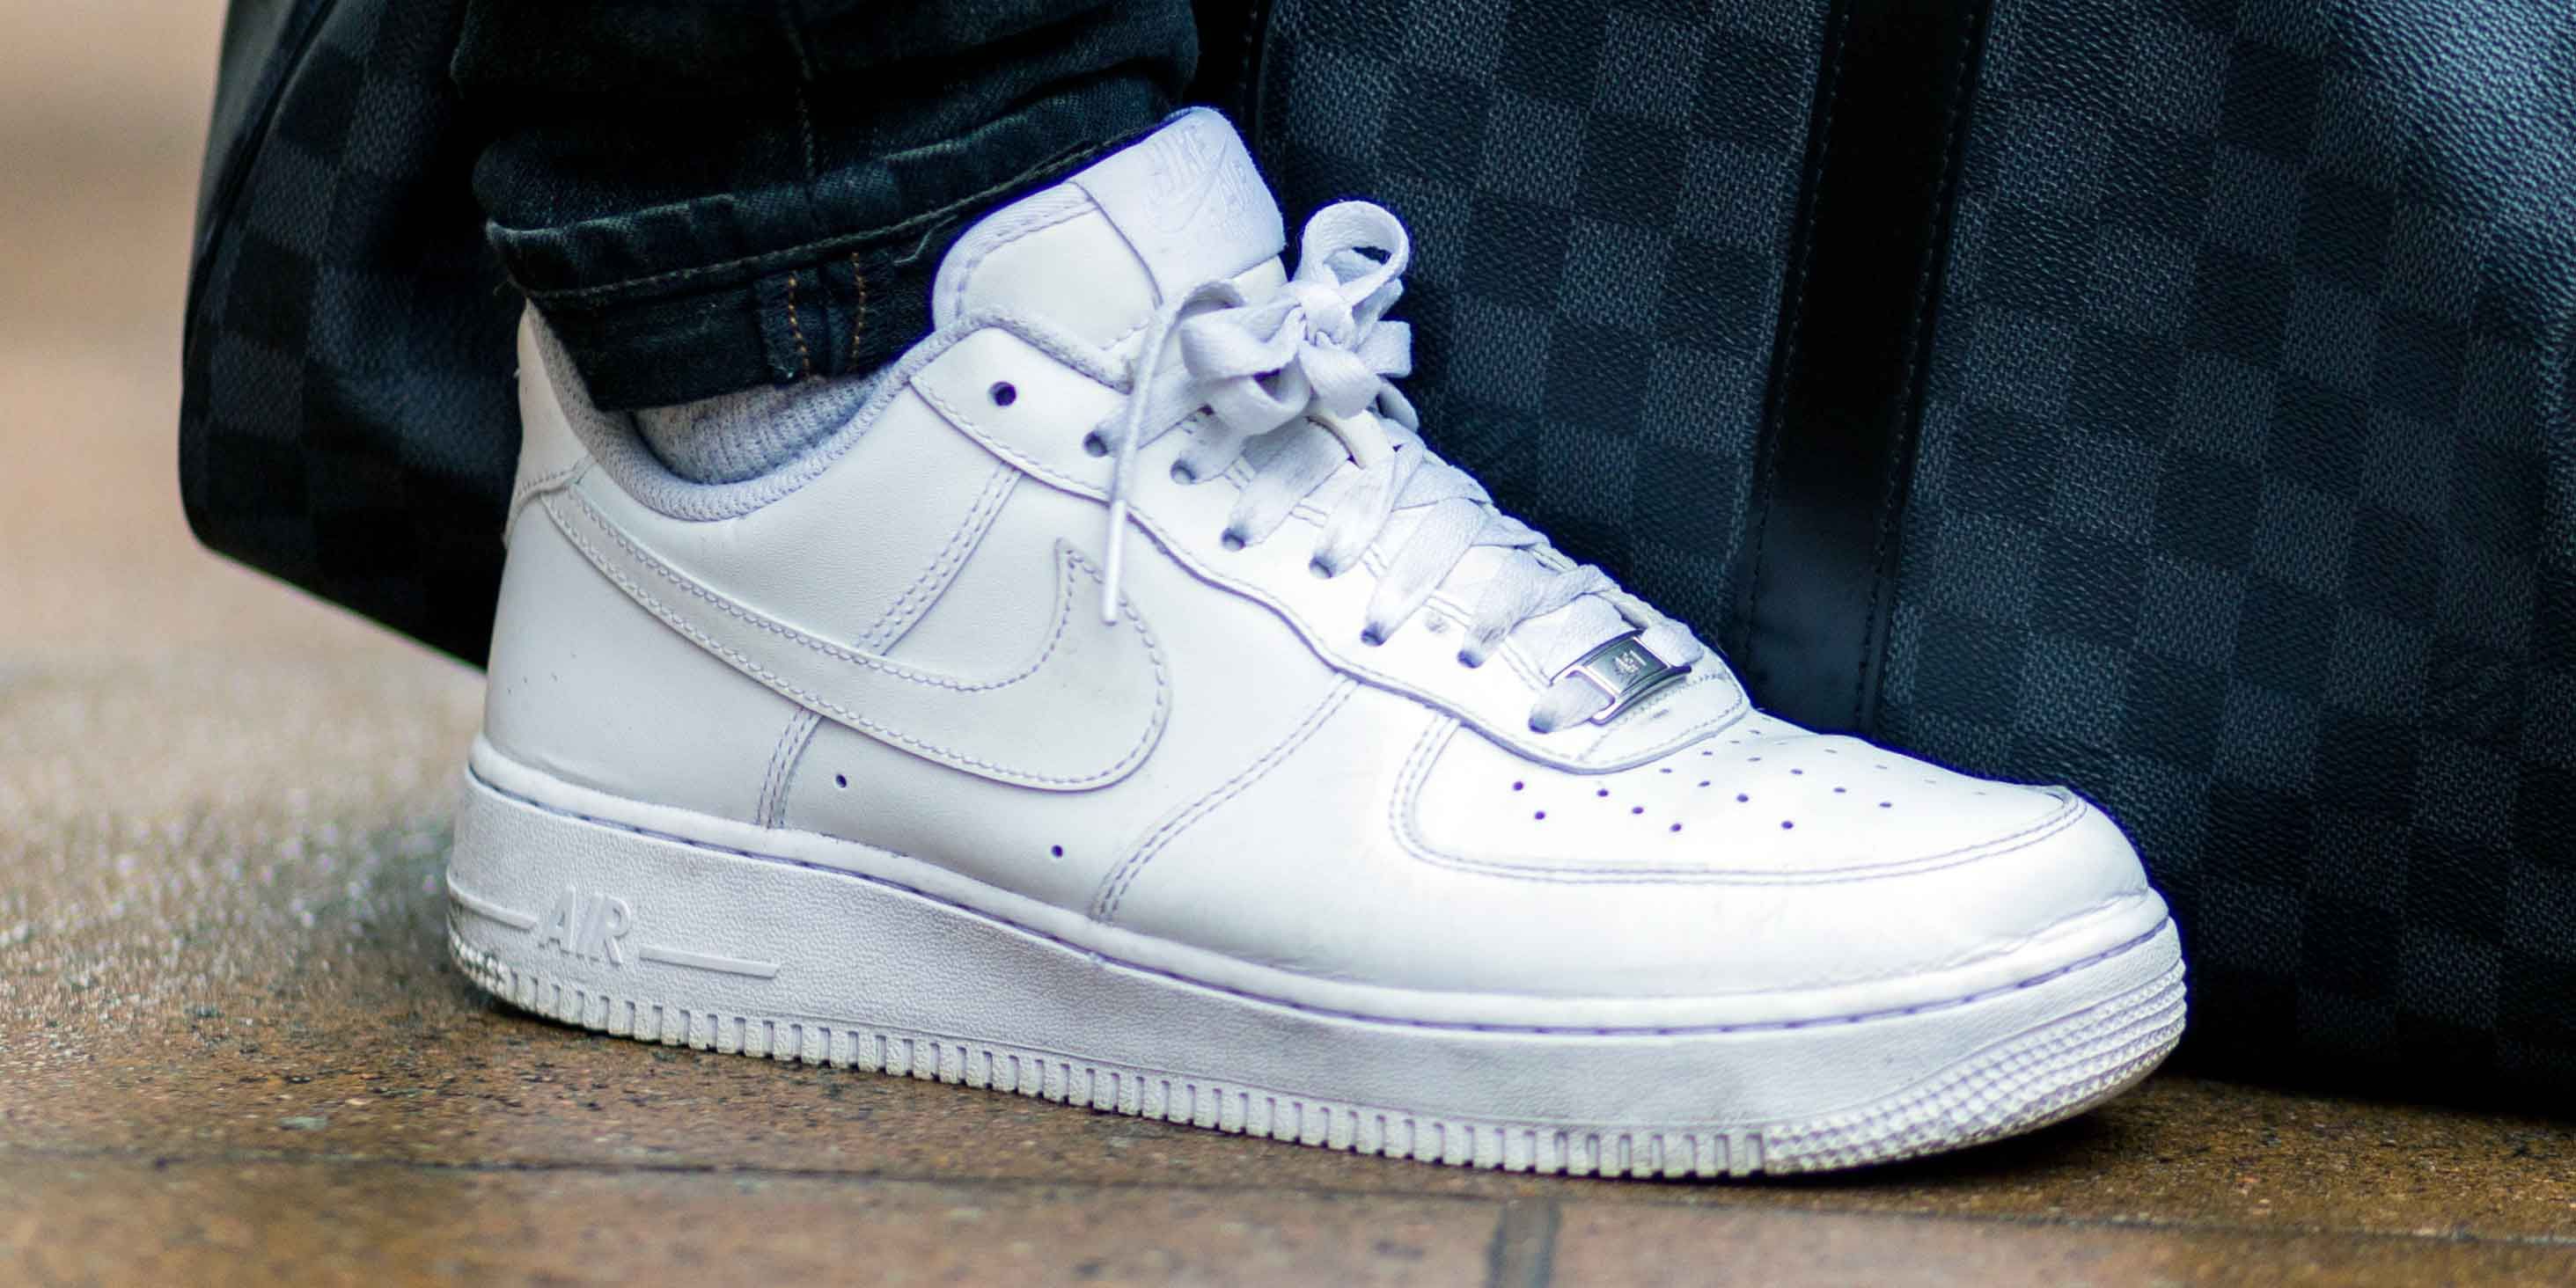 white air force style